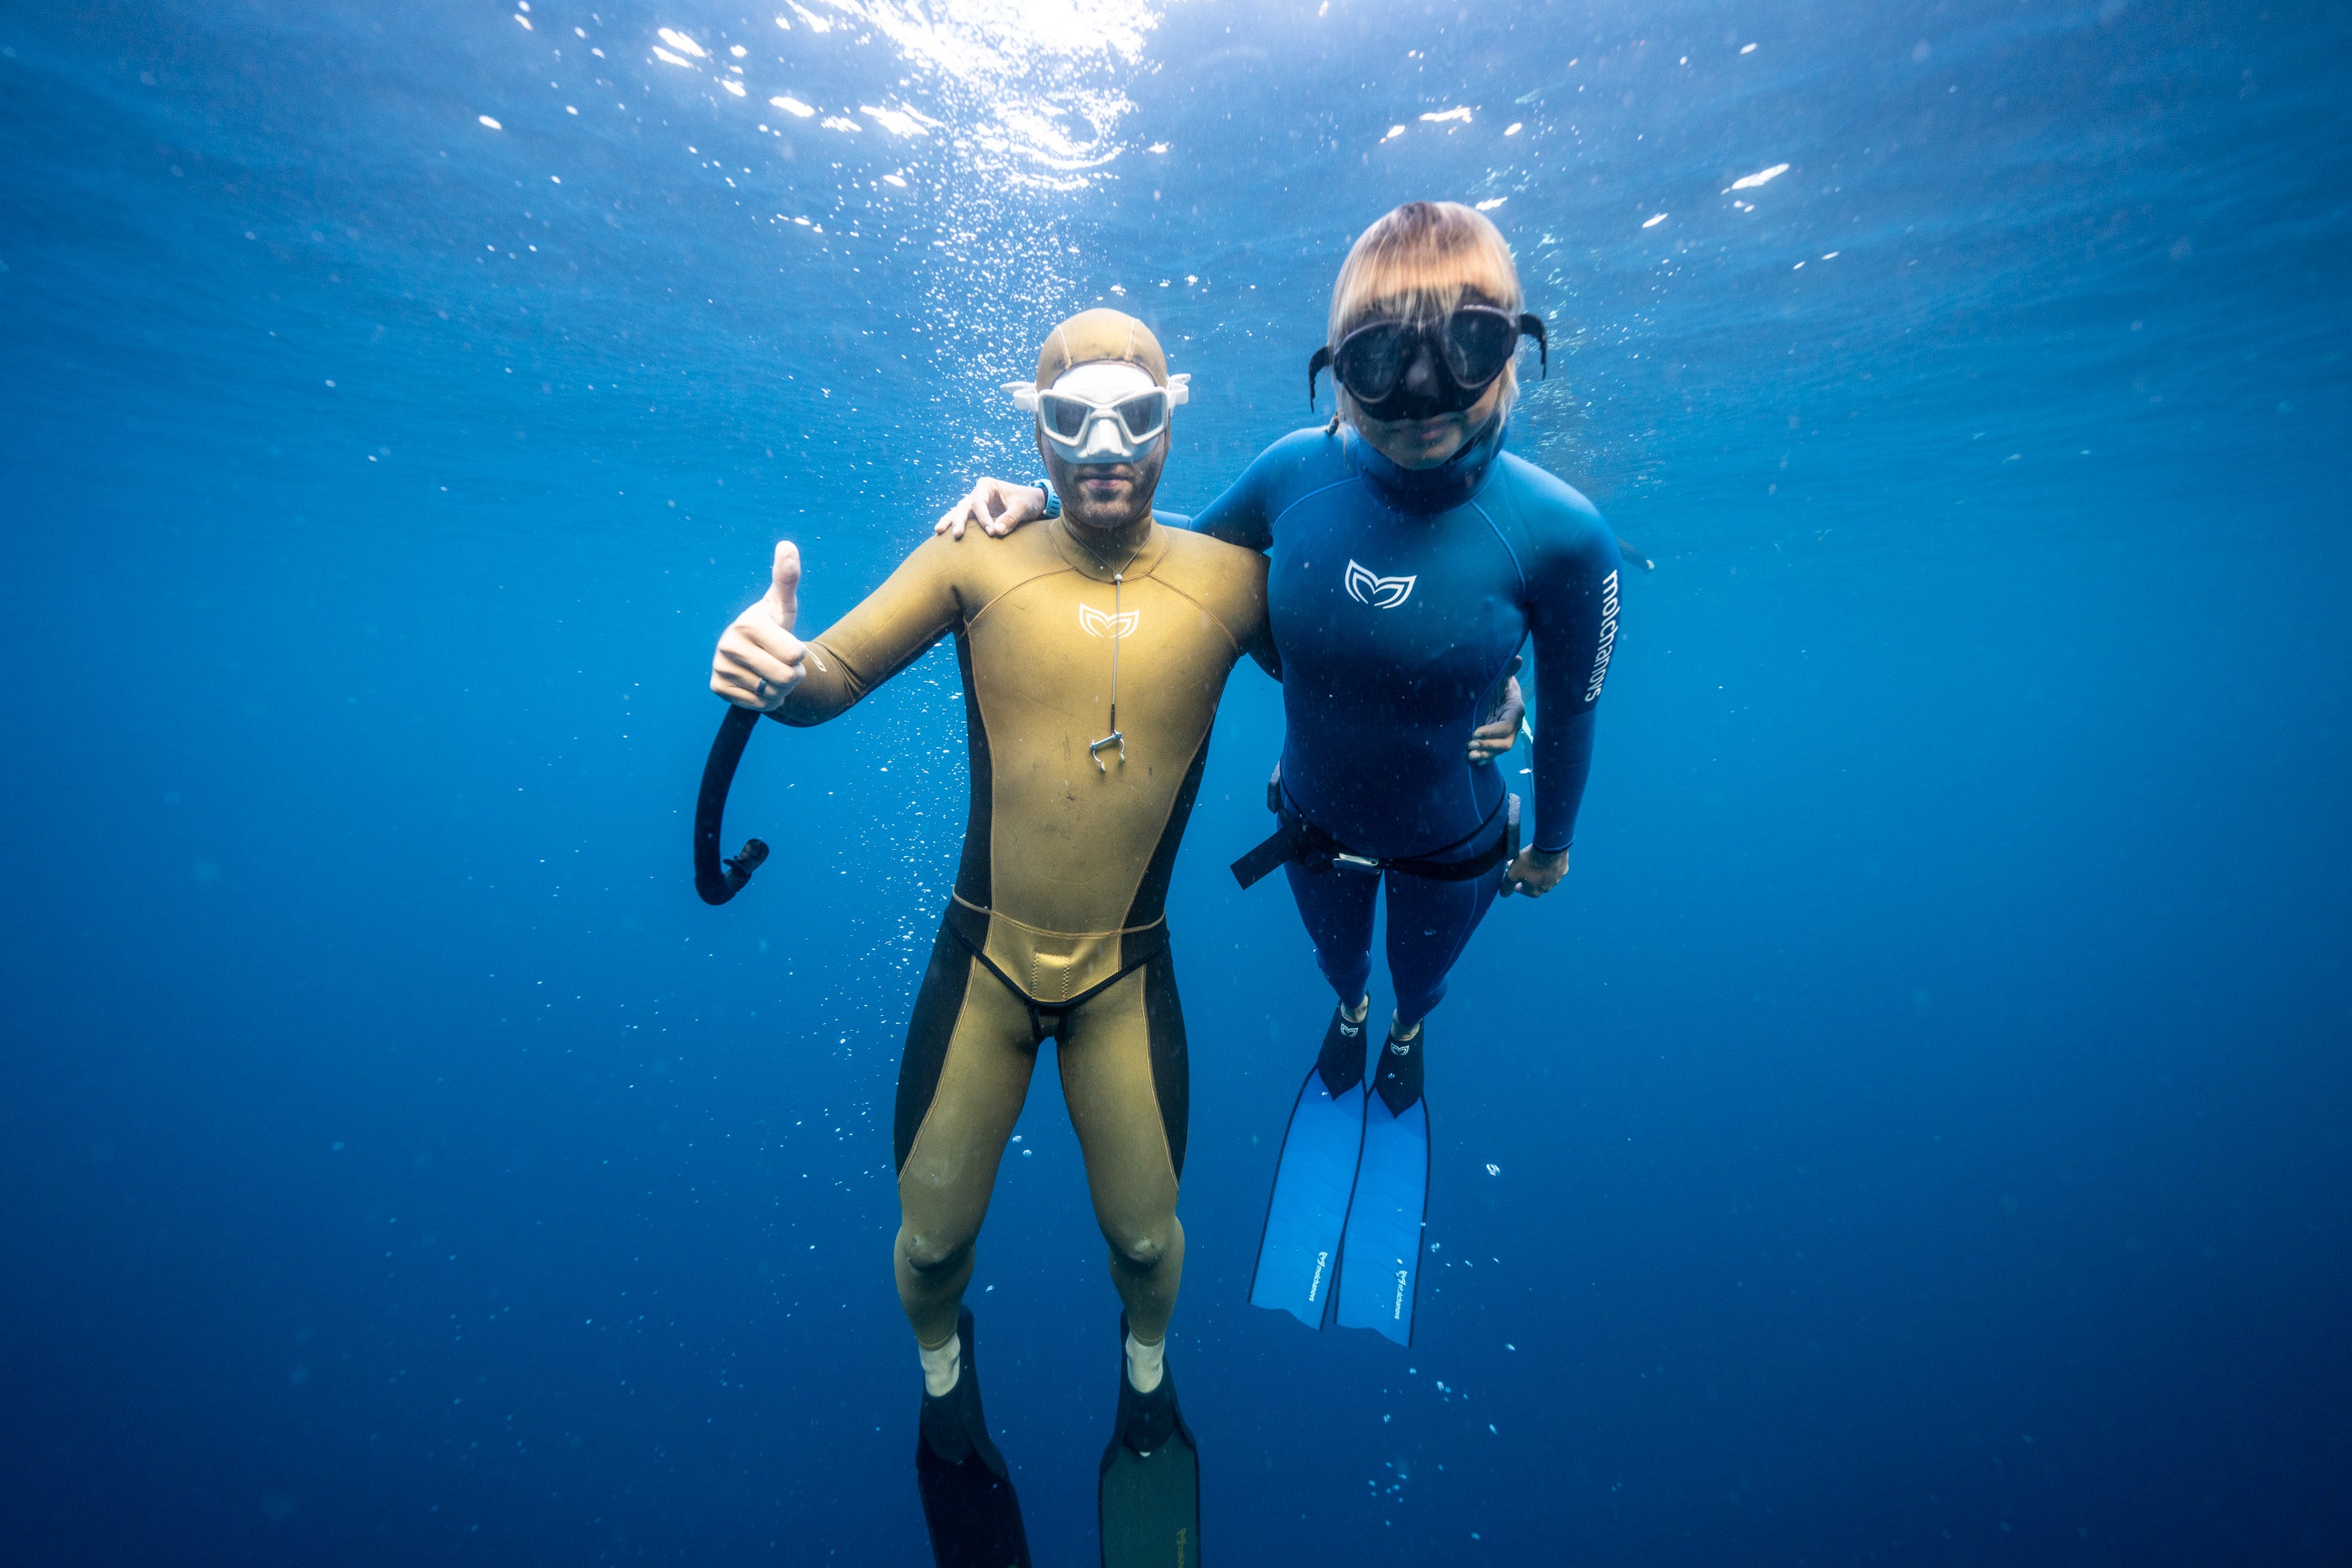 What Type of Wetsuit Should I Buy for Freediving?